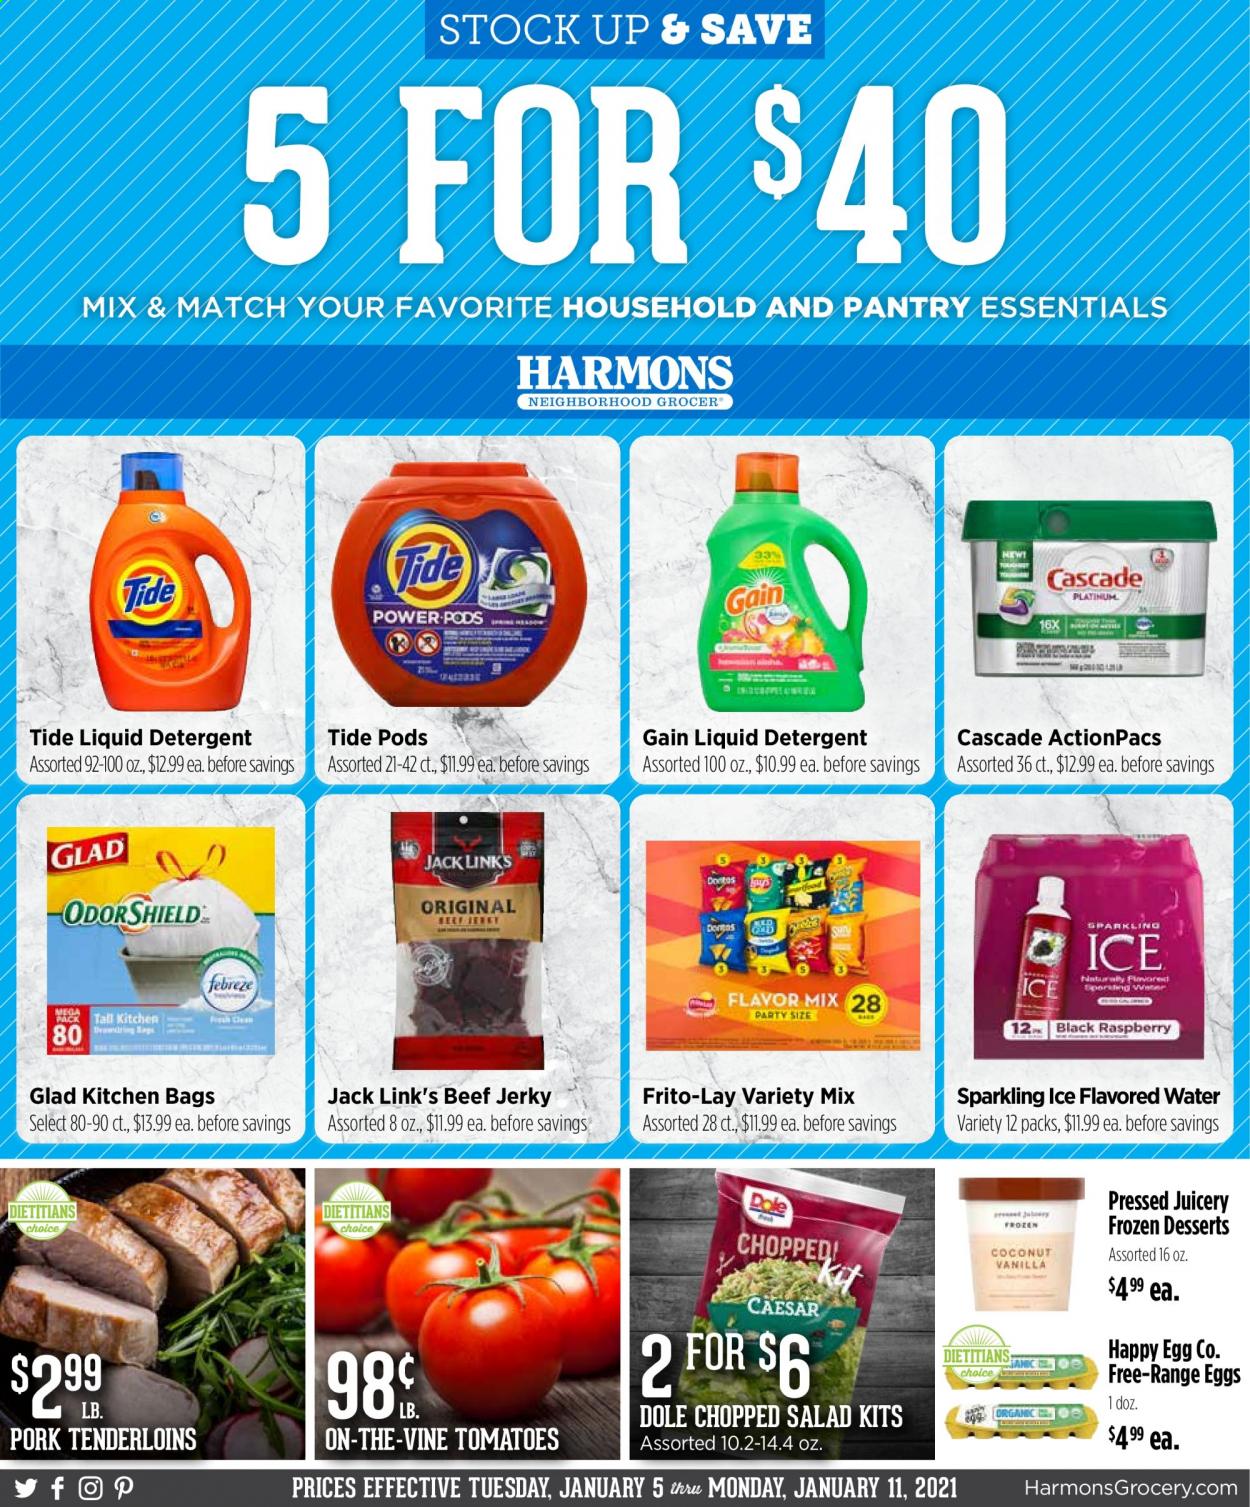 thumbnail - Harmons Flyer - 01/05/2021 - 01/11/2021 - Sales products - Dole, salad, beef jerky, jerky, eggs, Frito-Lay, Jack Link's, flavored water, pork tenderloin, detergent, Gain, Cascade, Tide, liquid detergent. Page 1.